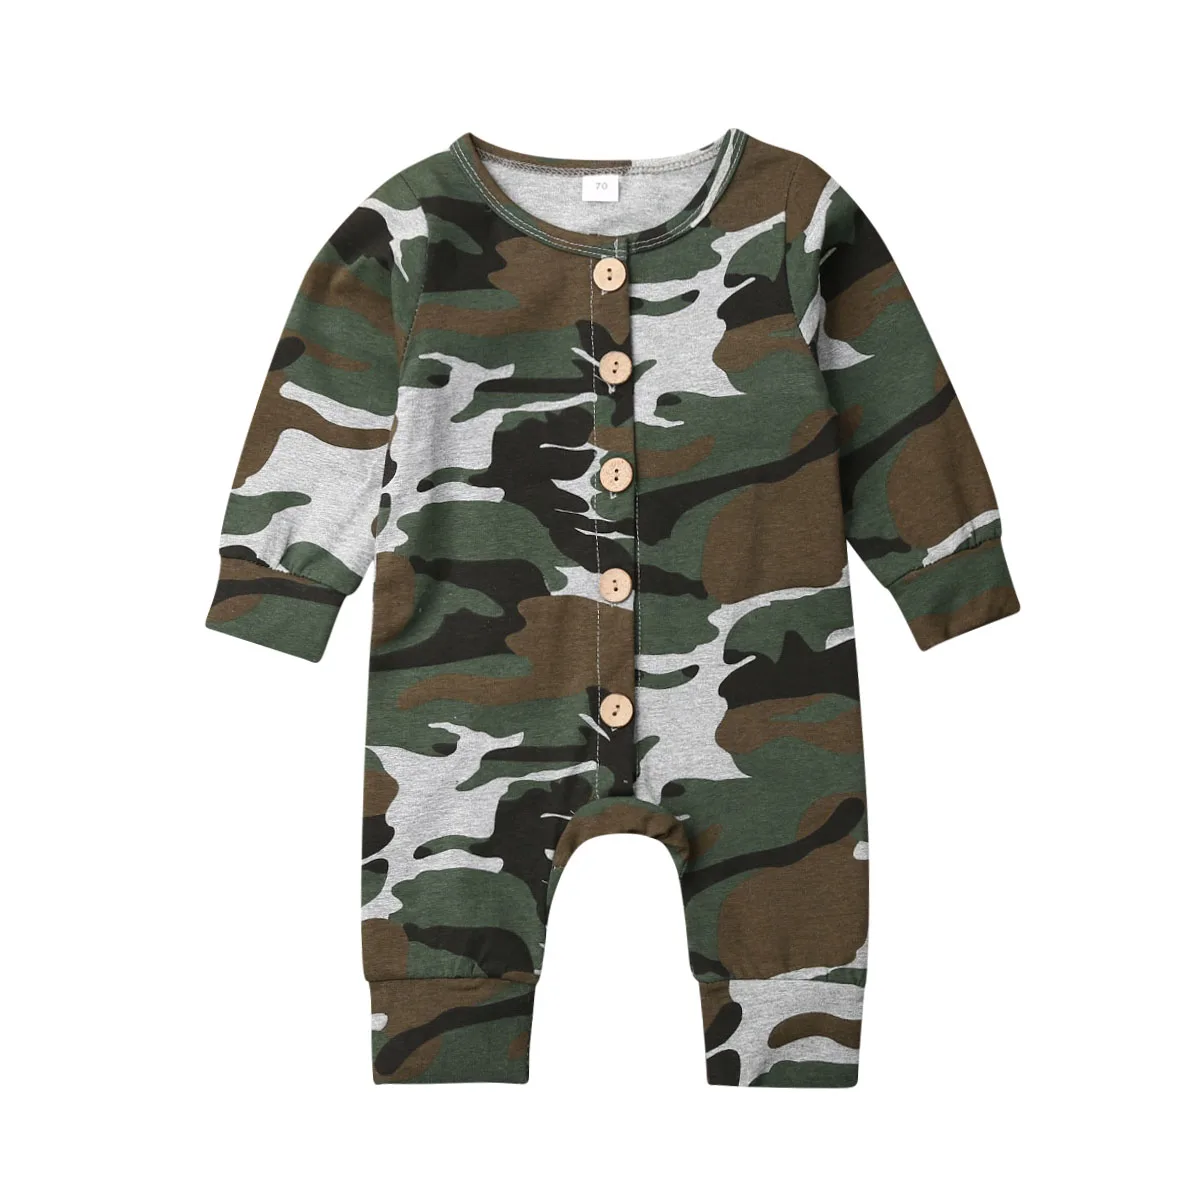 US Baby Boy Girl Camouflage Romper Jumpsuit Bodysuit Playsuit Outfit Clothes res 